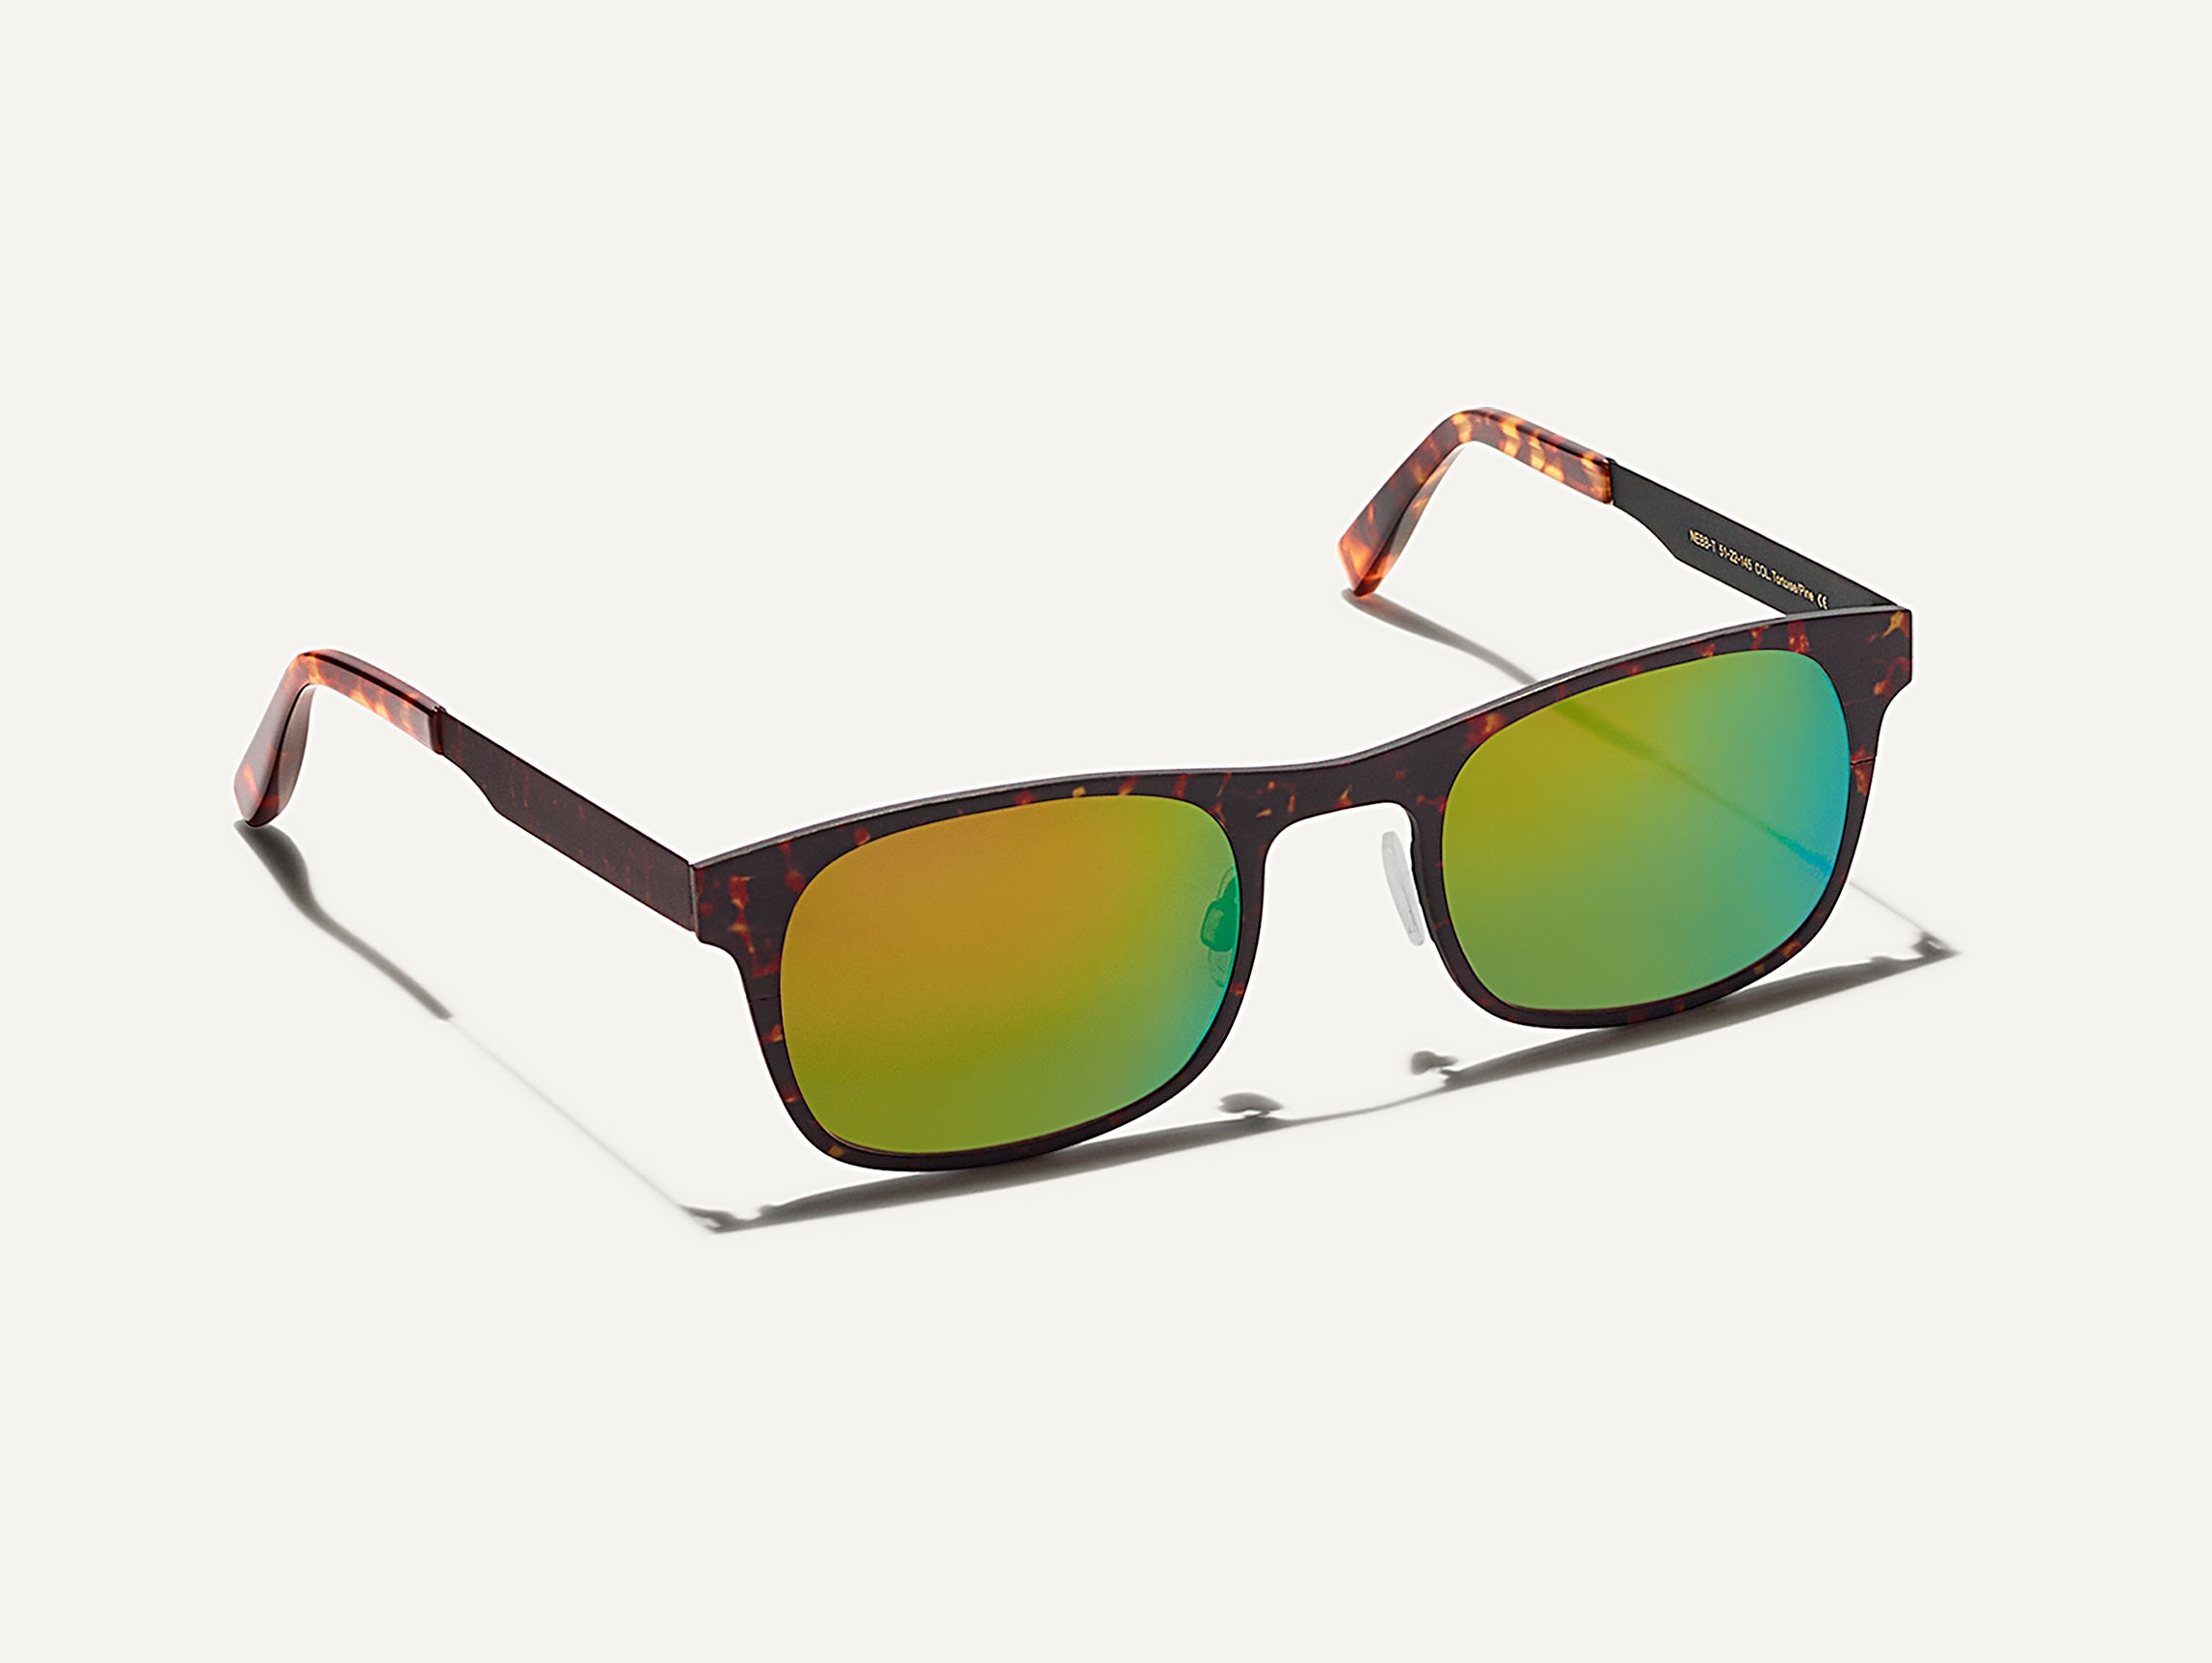 The NEBB-T in Tortoise/Pine with Green Flash Lenses